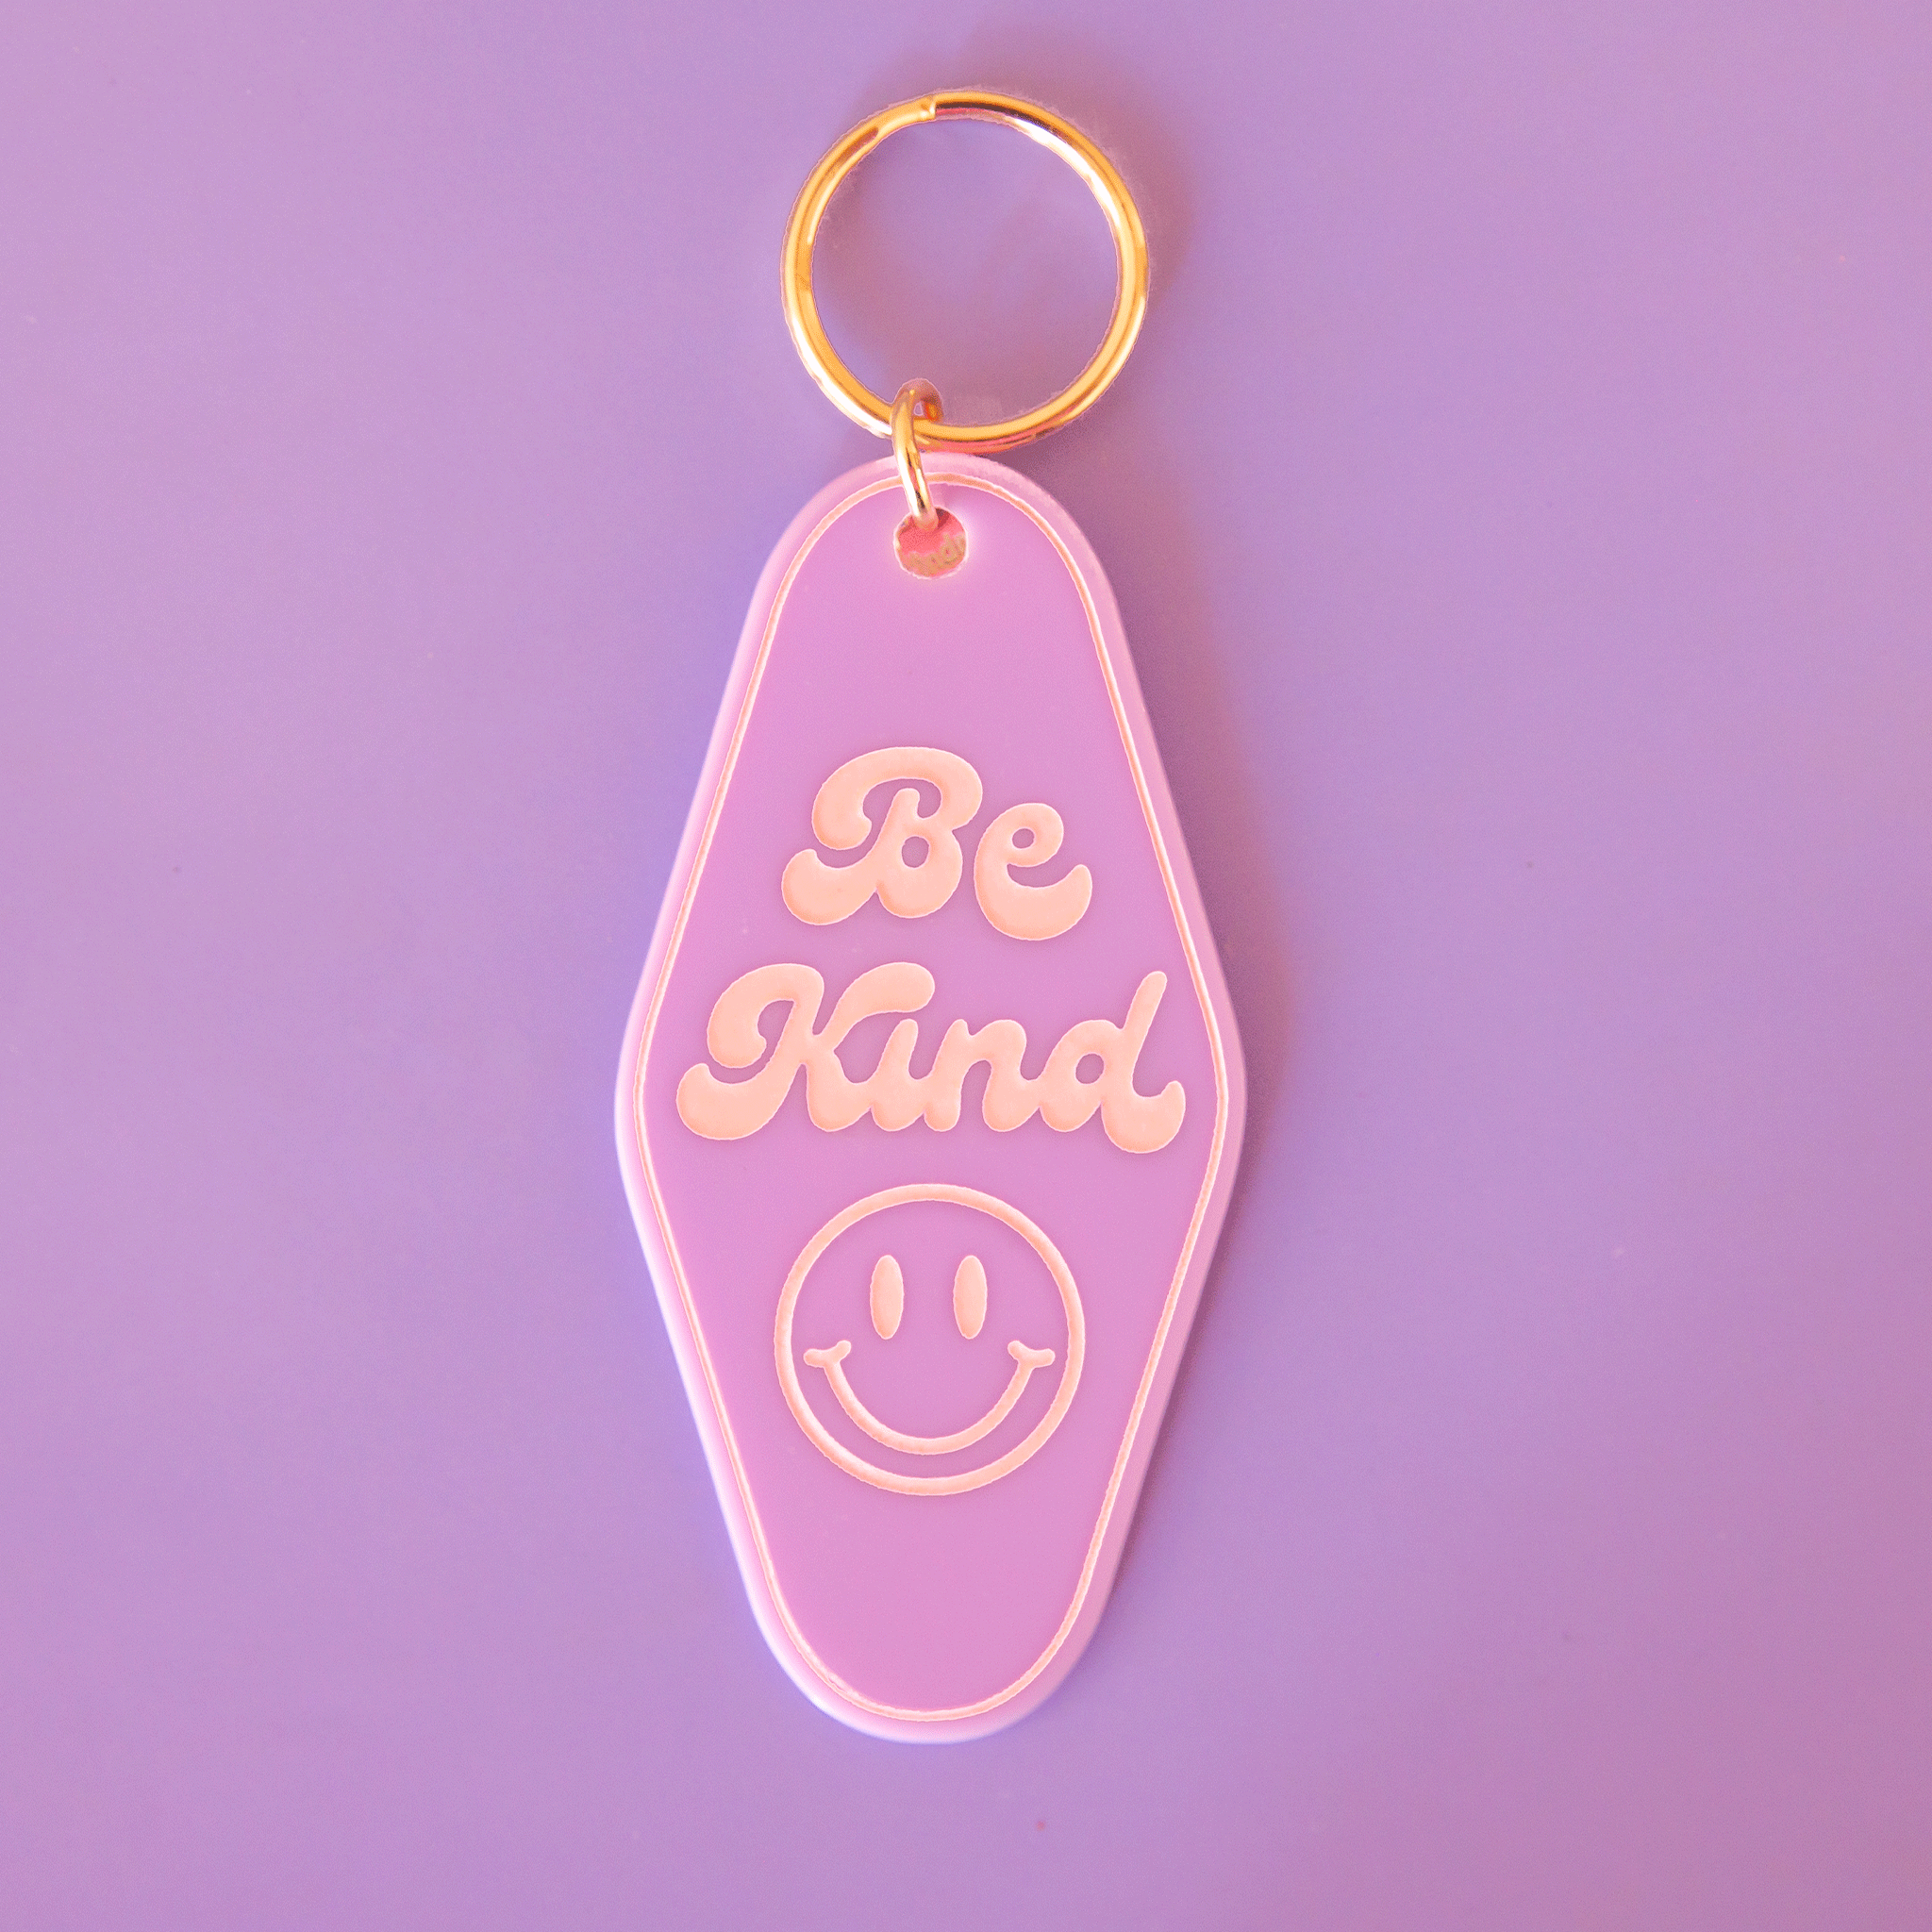 On a purple background is a diamond shaped keychain in a lilac shade with gold detailing, a smiley face and text that reads, "Be Kind".